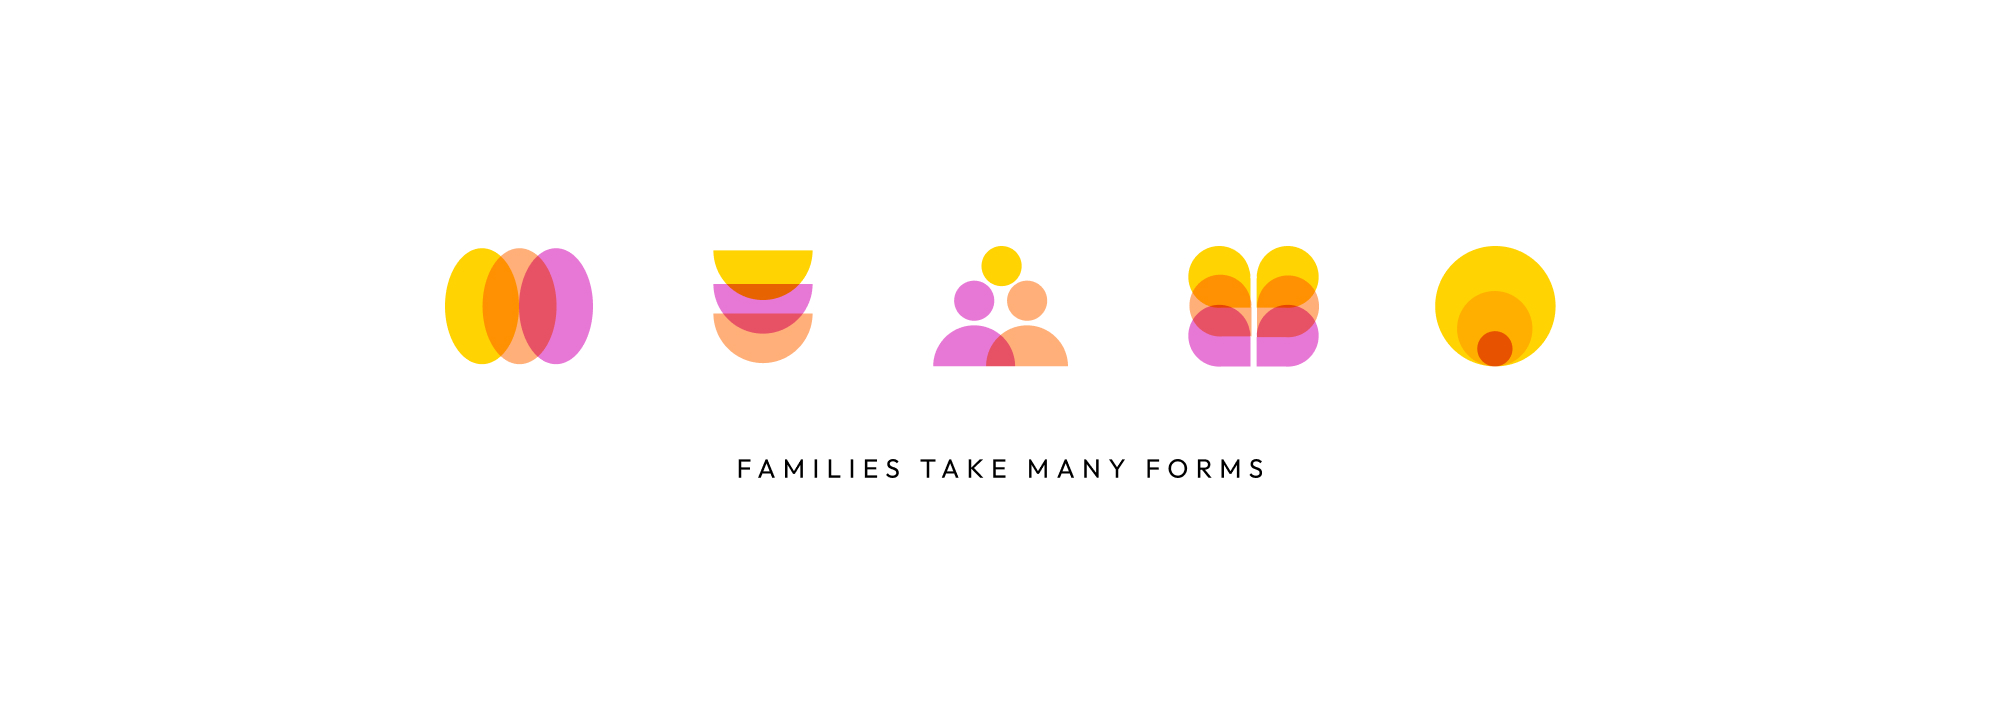 A row of colorful yellow, orange, and purple geometric icons made of shapes expressing abstract families.